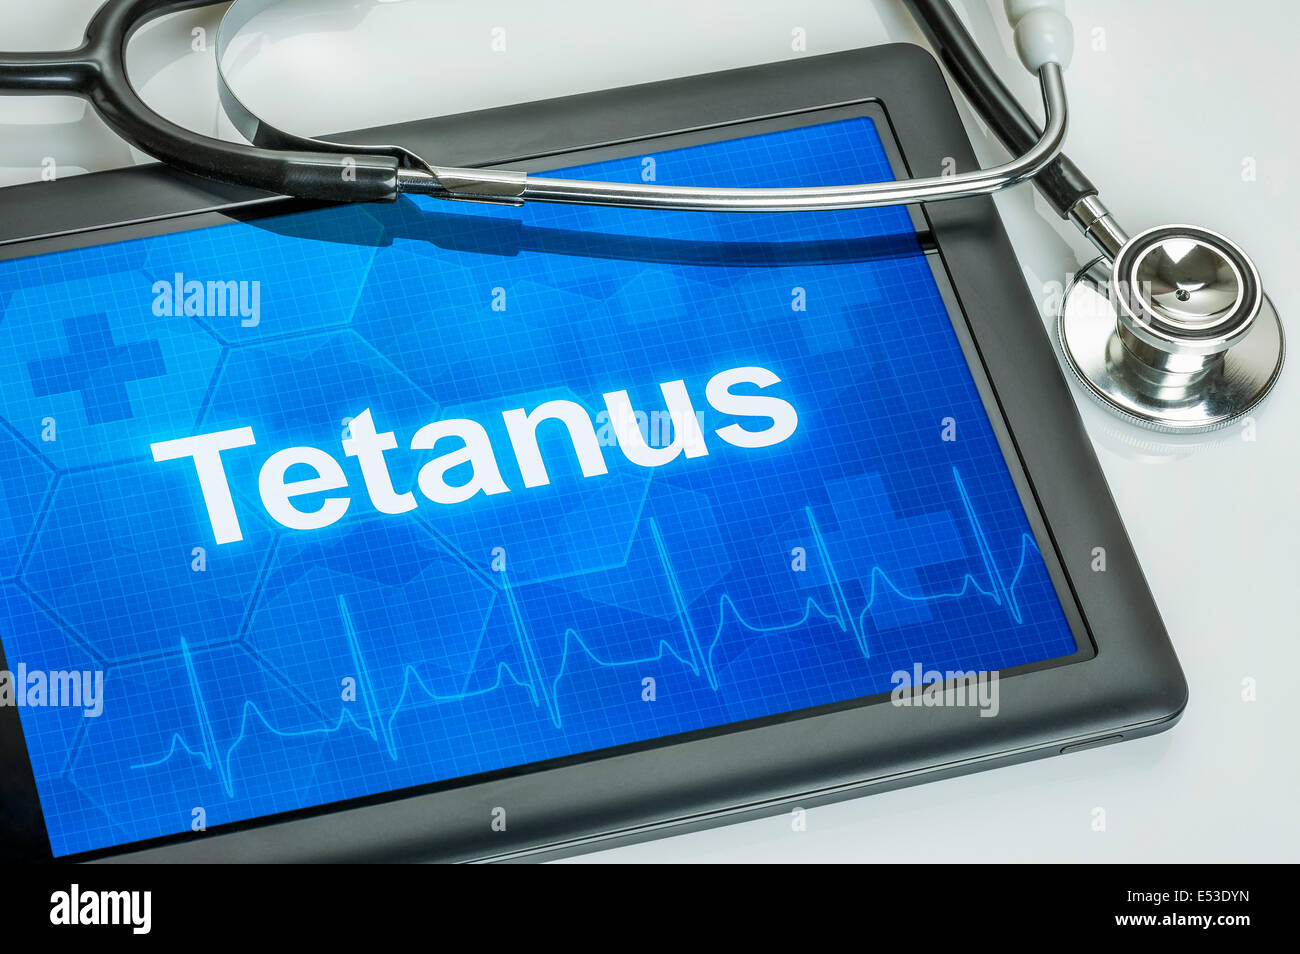 Tablet with the diagnosis Tetanus on the display Stock Photo